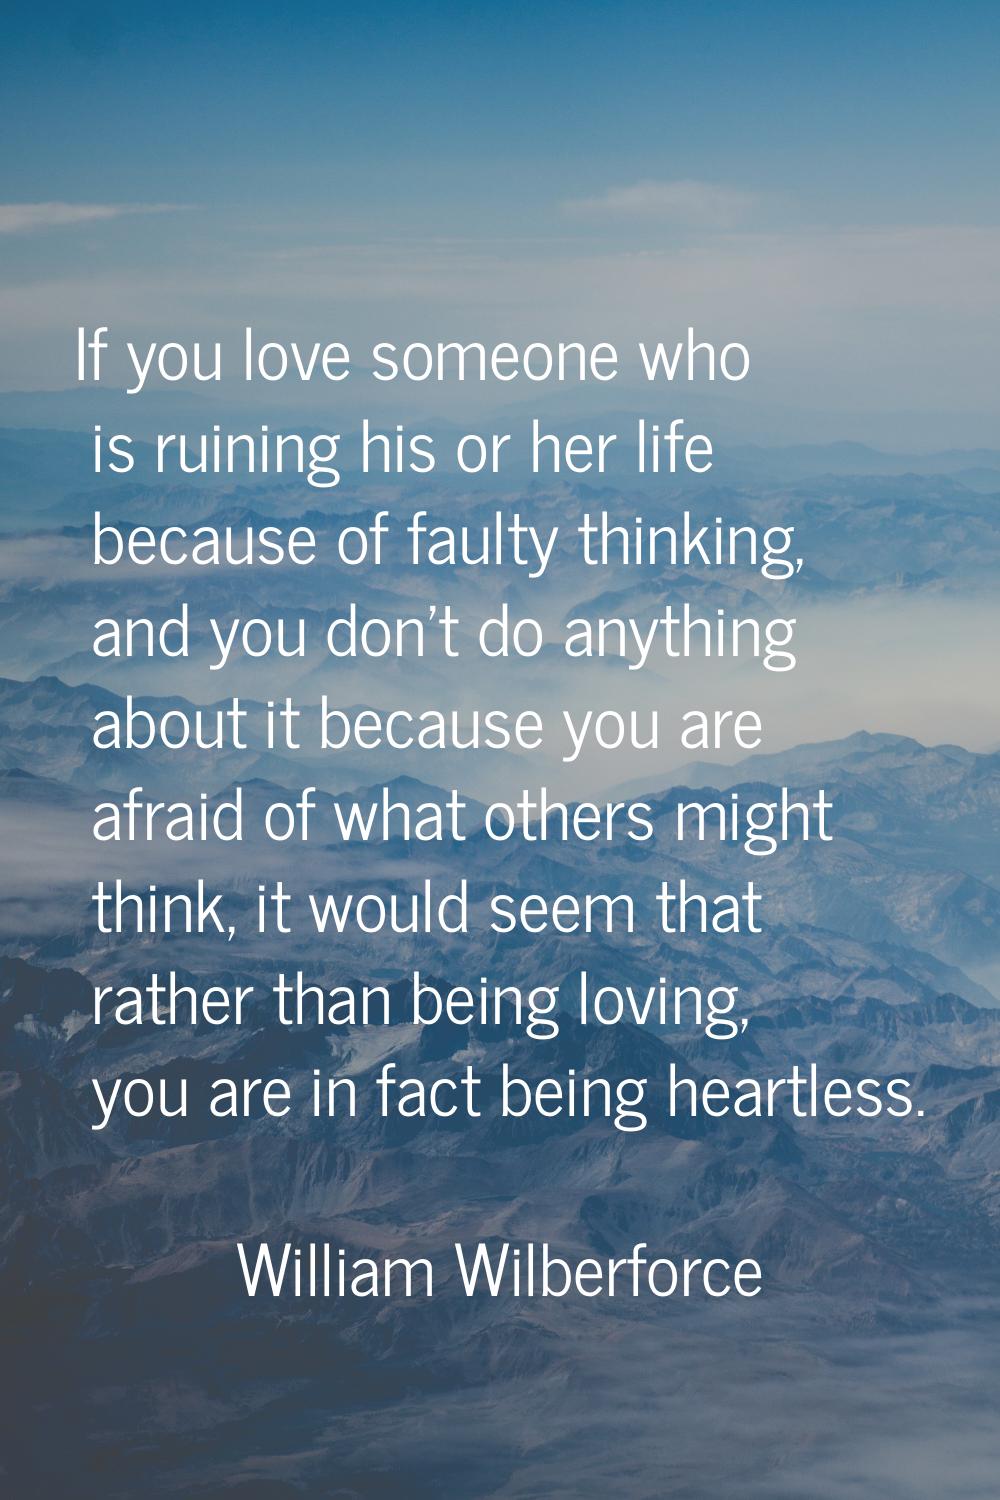 If you love someone who is ruining his or her life because of faulty thinking, and you don't do any